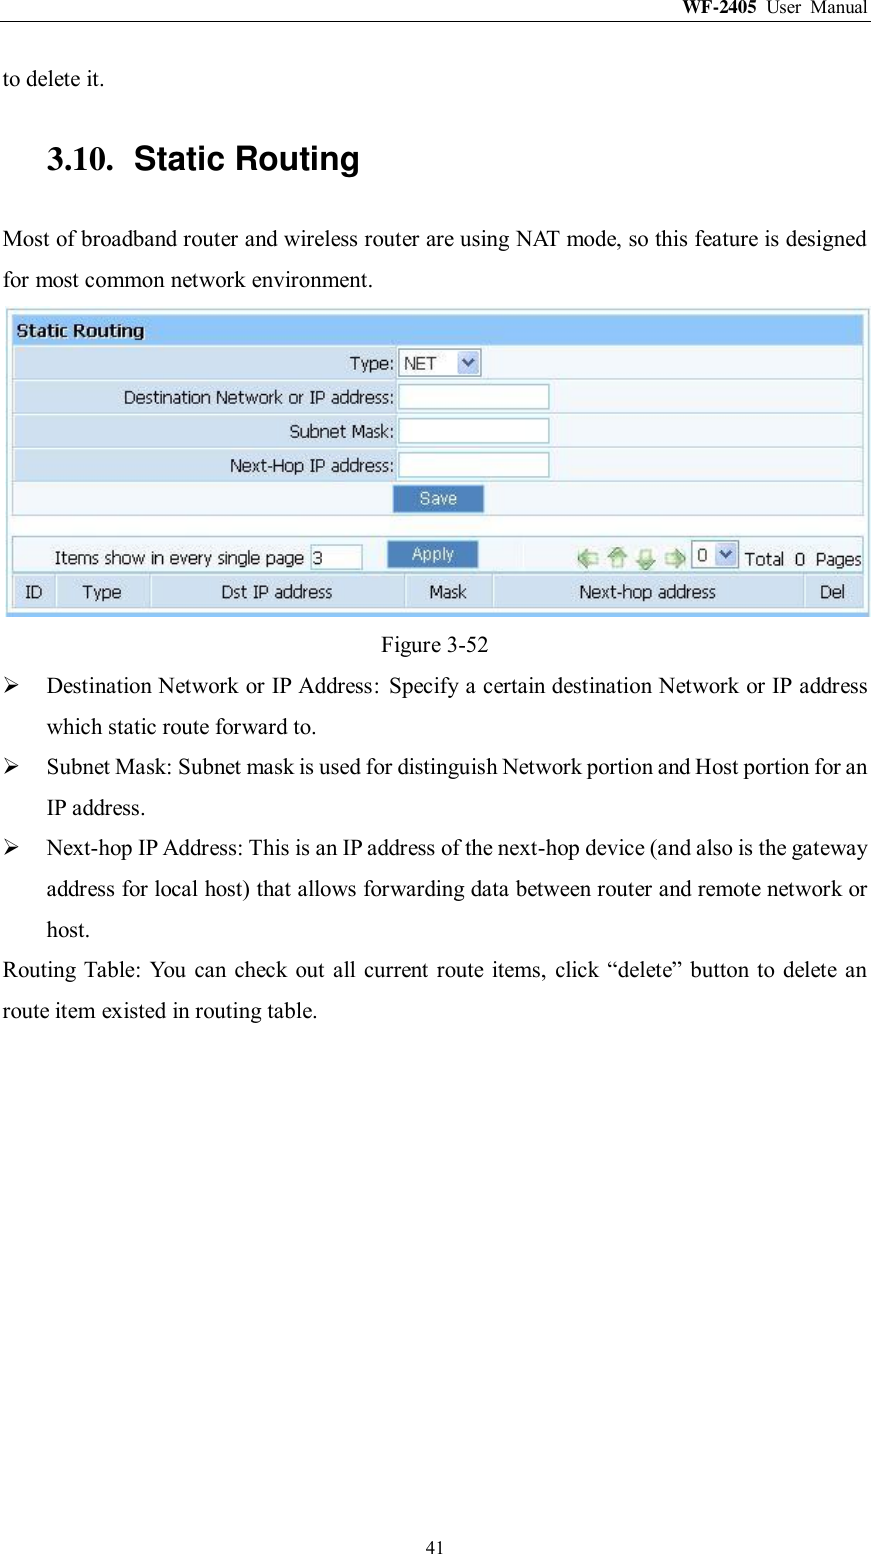 WF-2405  User  Manual  41 to delete it. 3.10.  Static Routing Most of broadband router and wireless router are using NAT mode, so this feature is designed for most common network environment.  Figure 3-52  Destination Network or IP Address:  Specify a certain destination Network or IP address which static route forward to.  Subnet Mask: Subnet mask is used for distinguish Network portion and Host portion for an IP address.  Next-hop IP Address: This is an IP address of the next-hop device (and also is the gateway address for local host) that allows forwarding data between router and remote network or host. Routing Table:  You can check out all current  route  items,  click  “delete”  button  to delete  an route item existed in routing table. 